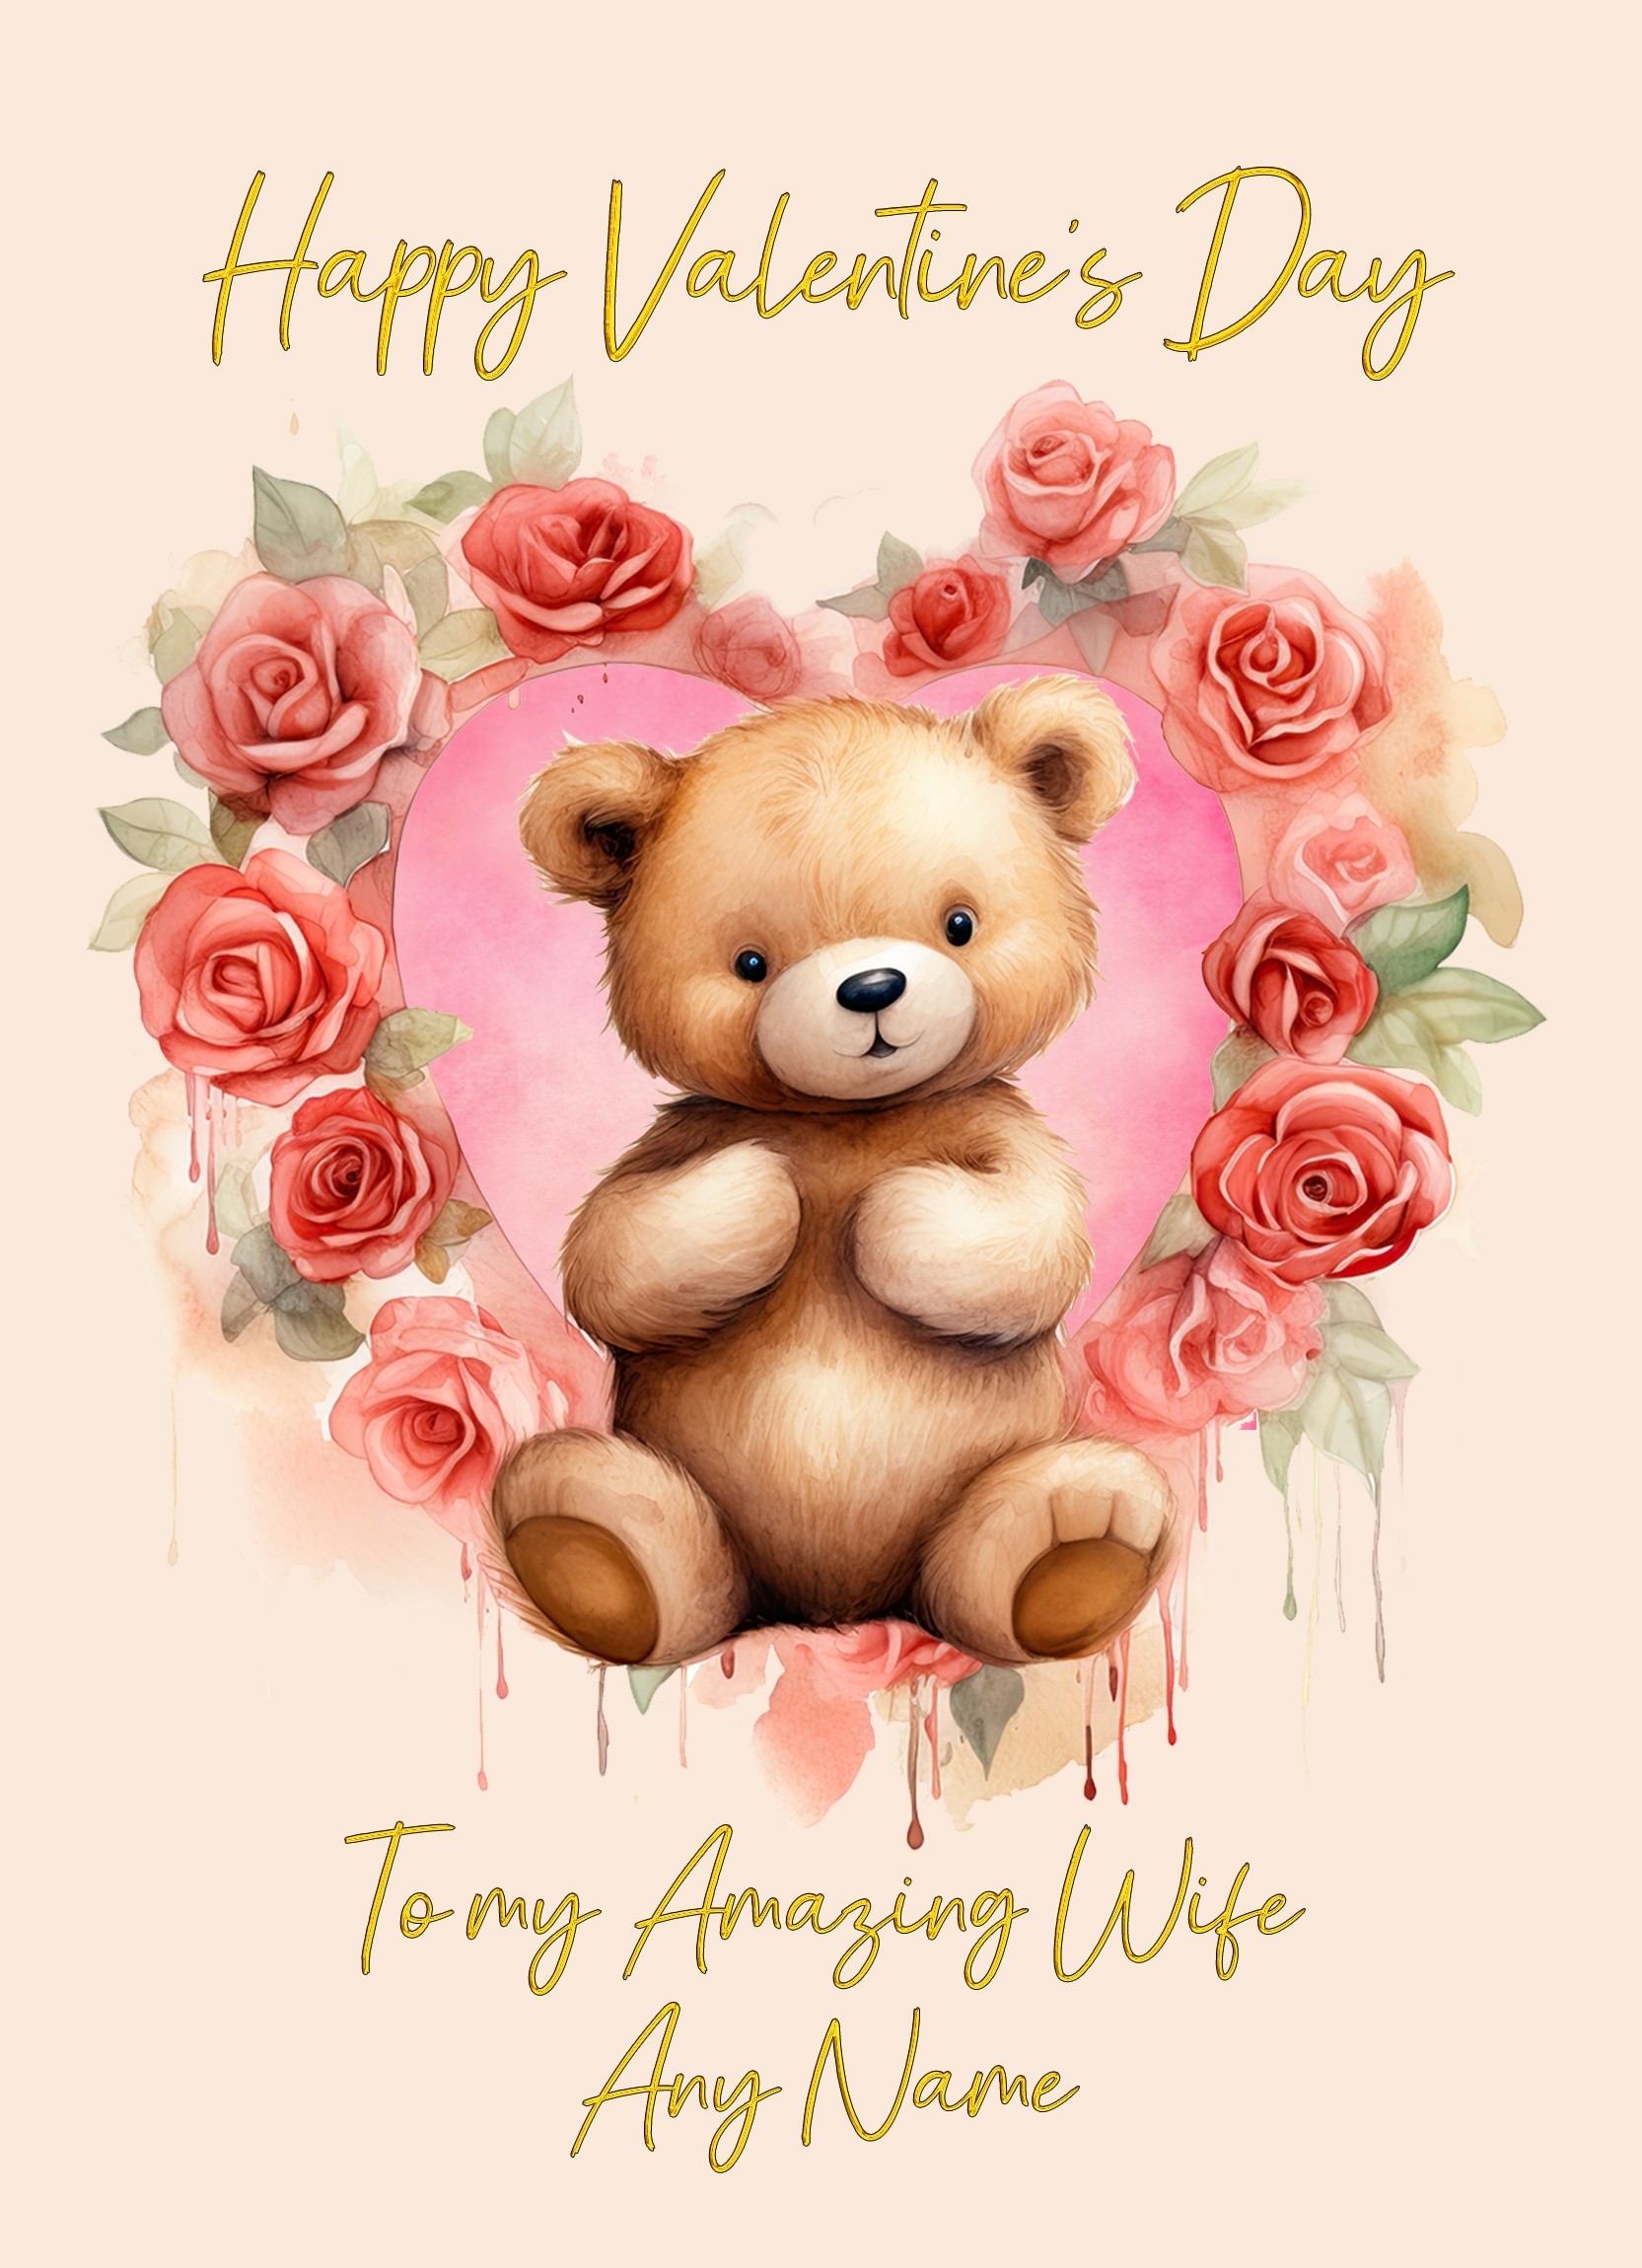 Personalised Valentines Day Card for Wife (Cuddly Bear, Design 2)